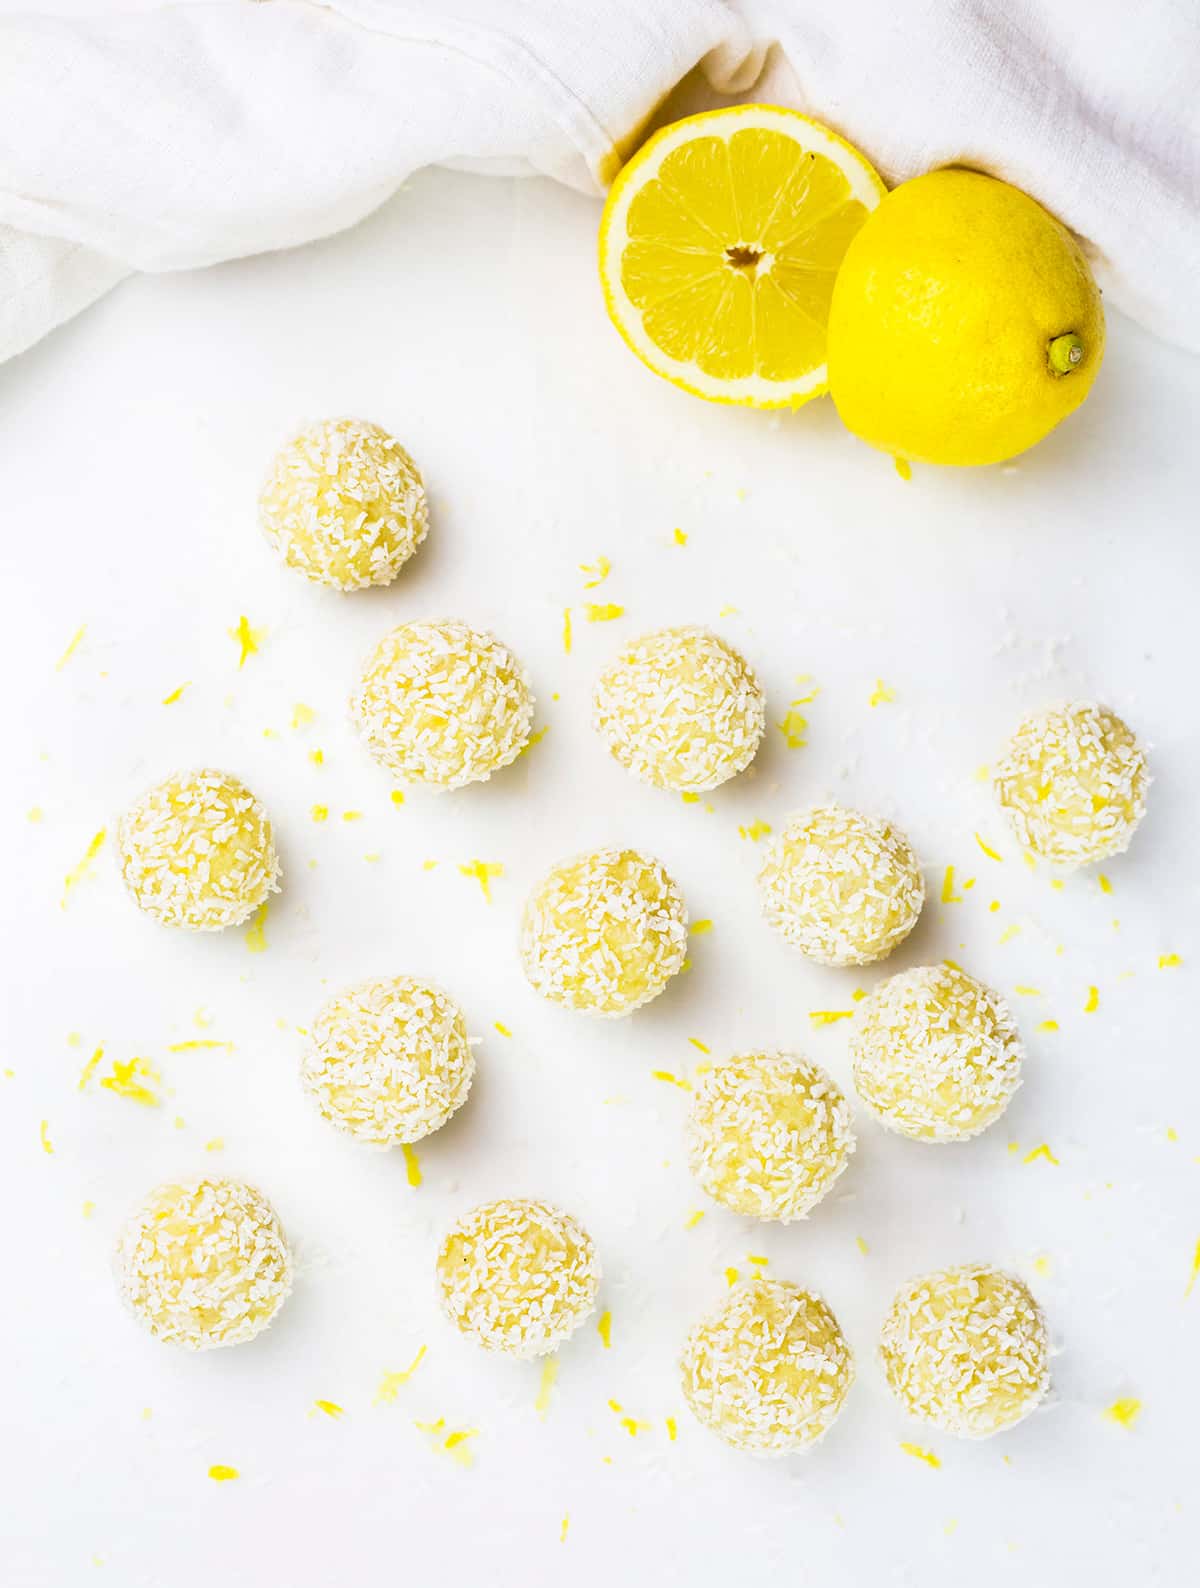 Birdseye view of lemon bliss balls scatted over white background with lemon zest in between and sliced lemon in background.